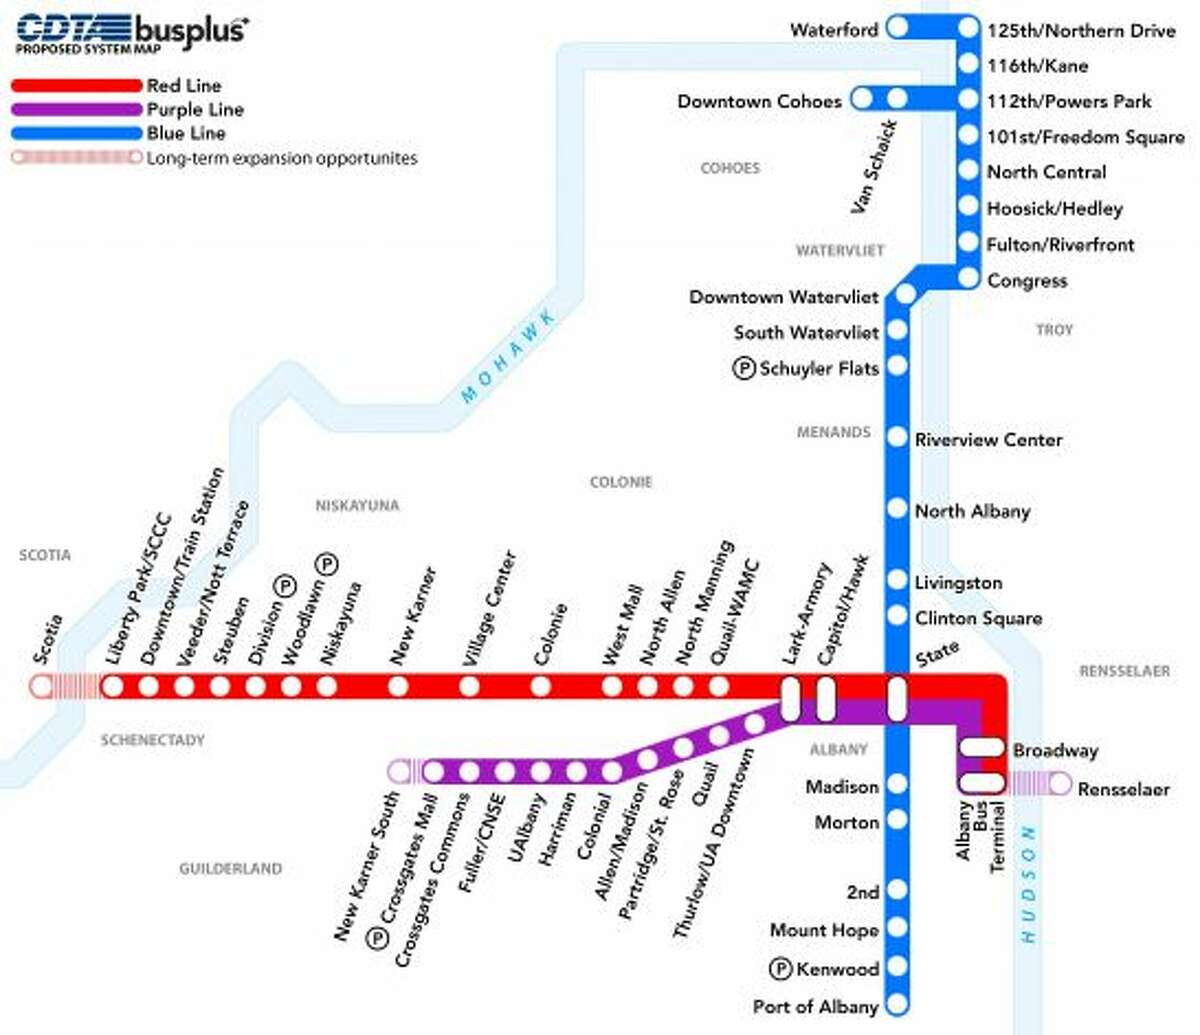 CDTA provided a map of the two new proposed BusPlus rapid transit routes.